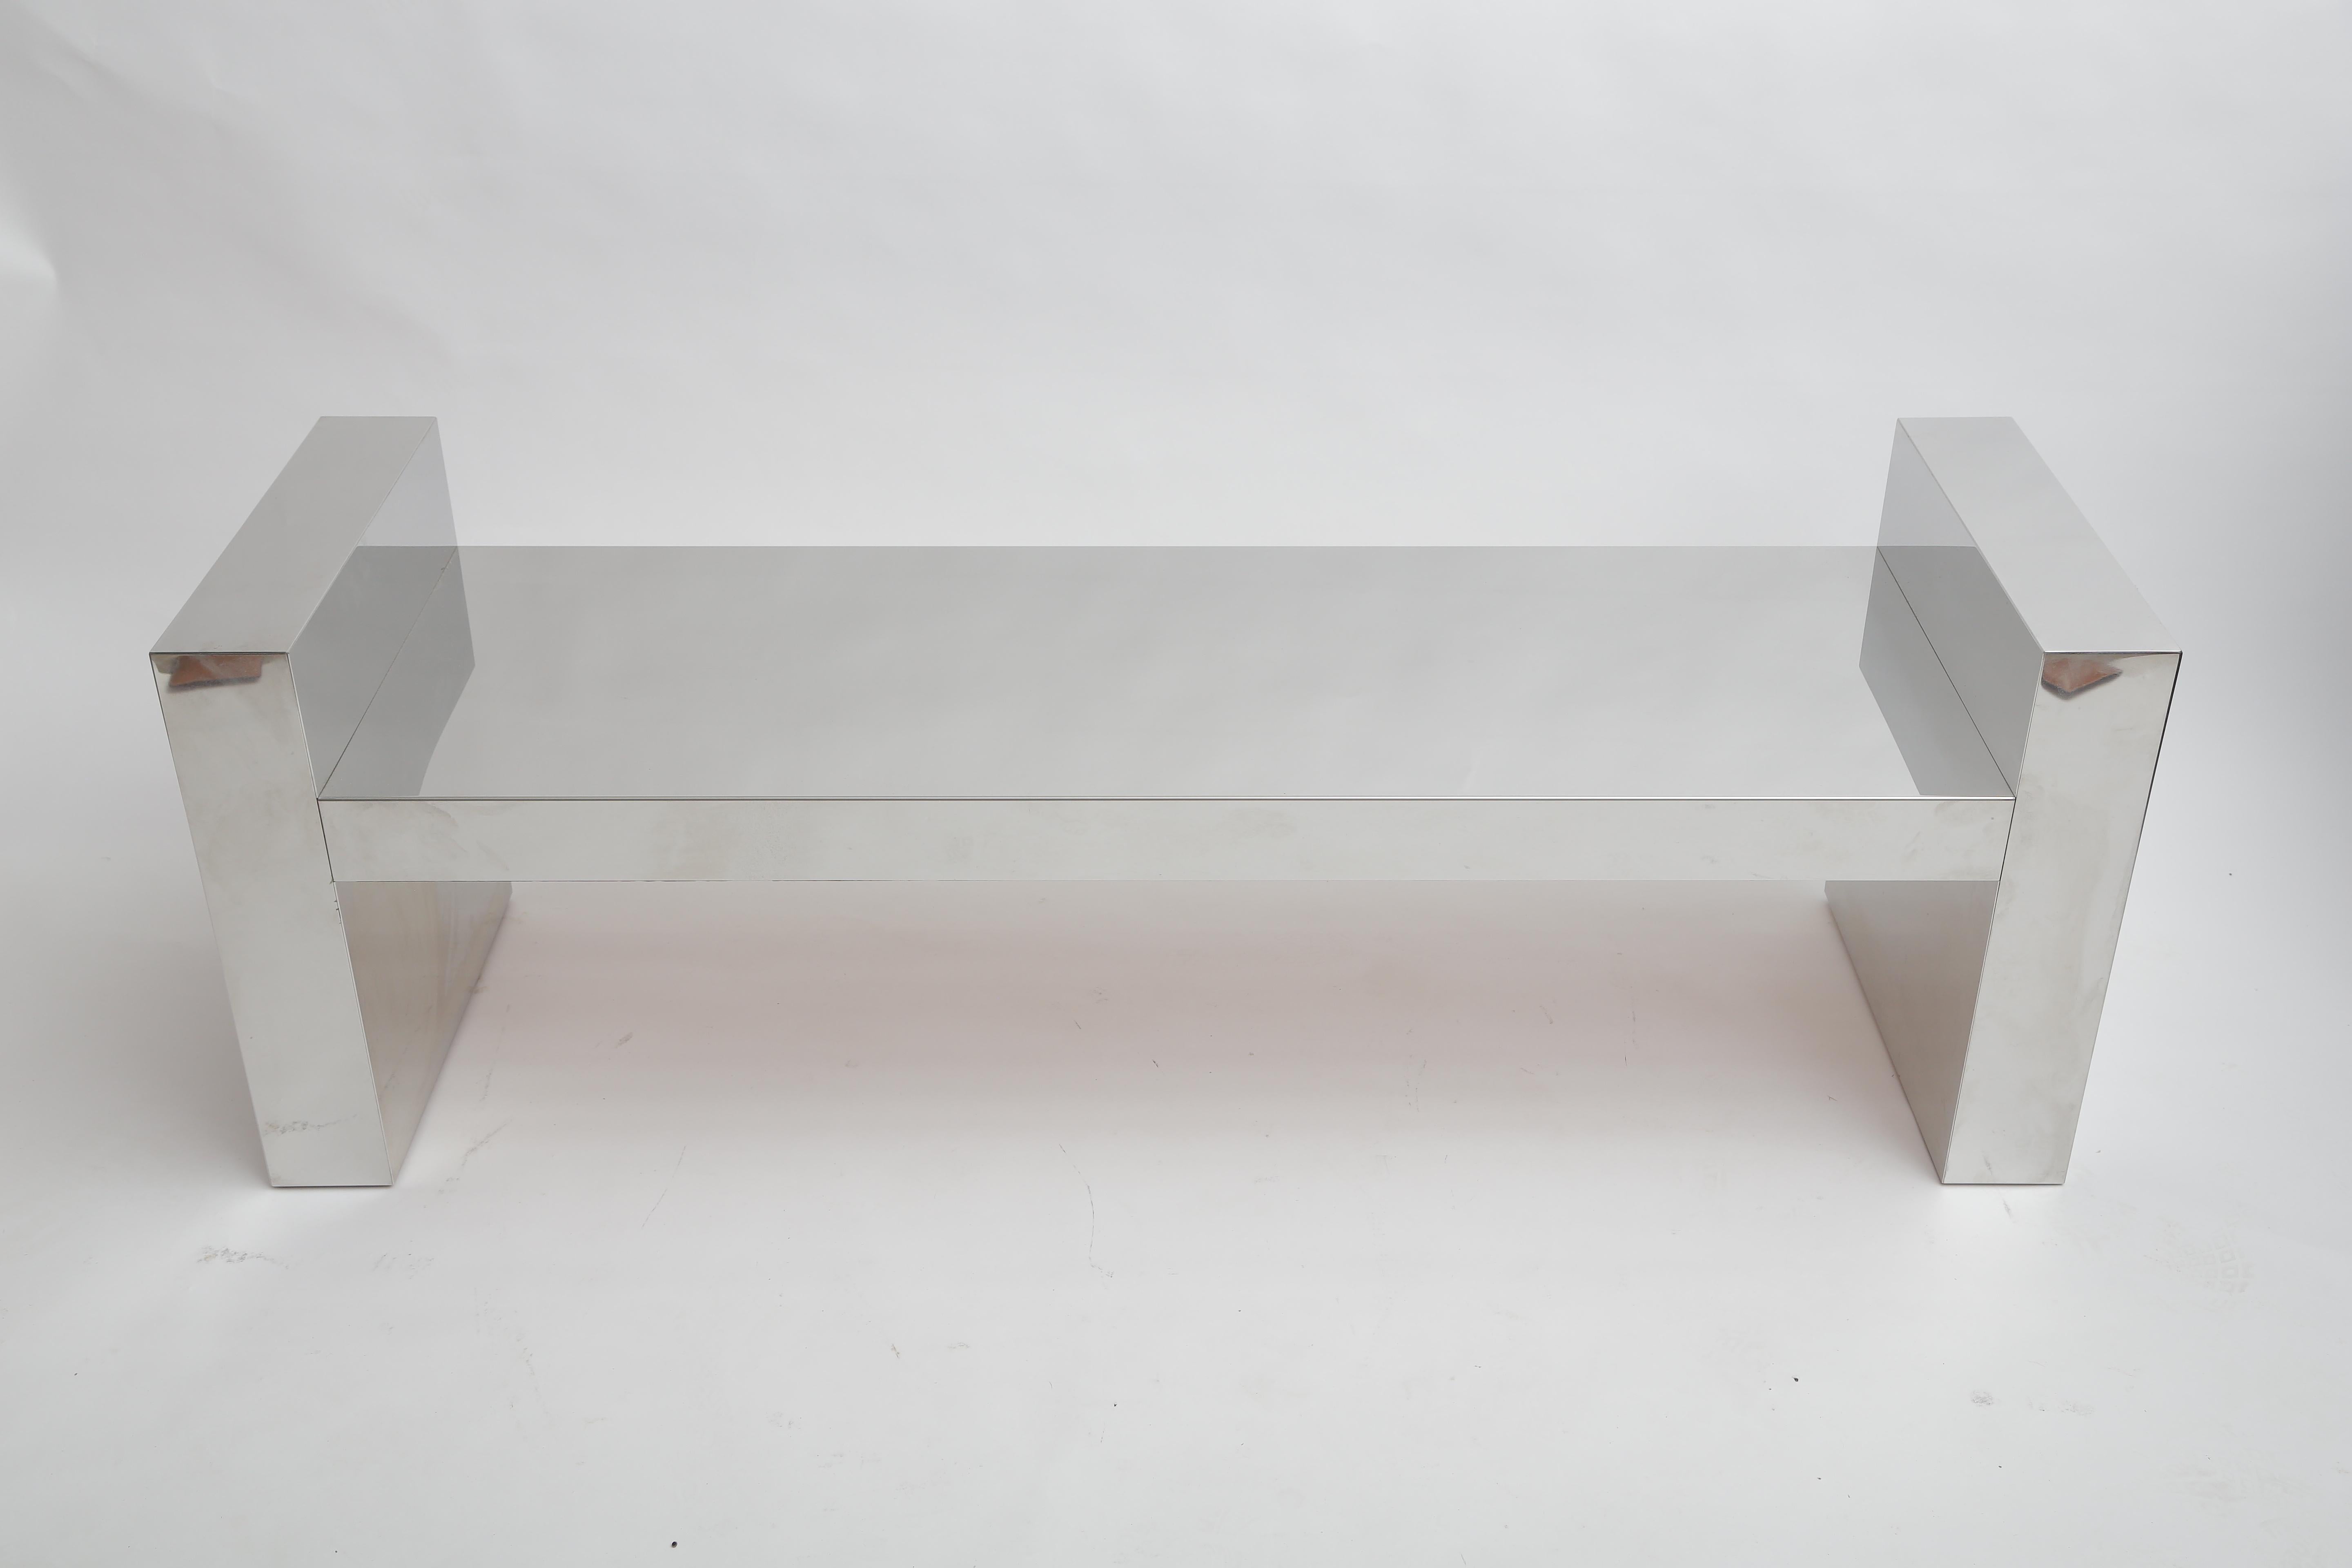 The H-Bench is rarely seen in polished steel
Authenticated by Tom Langevin, former director of design
of Springer Ltd.